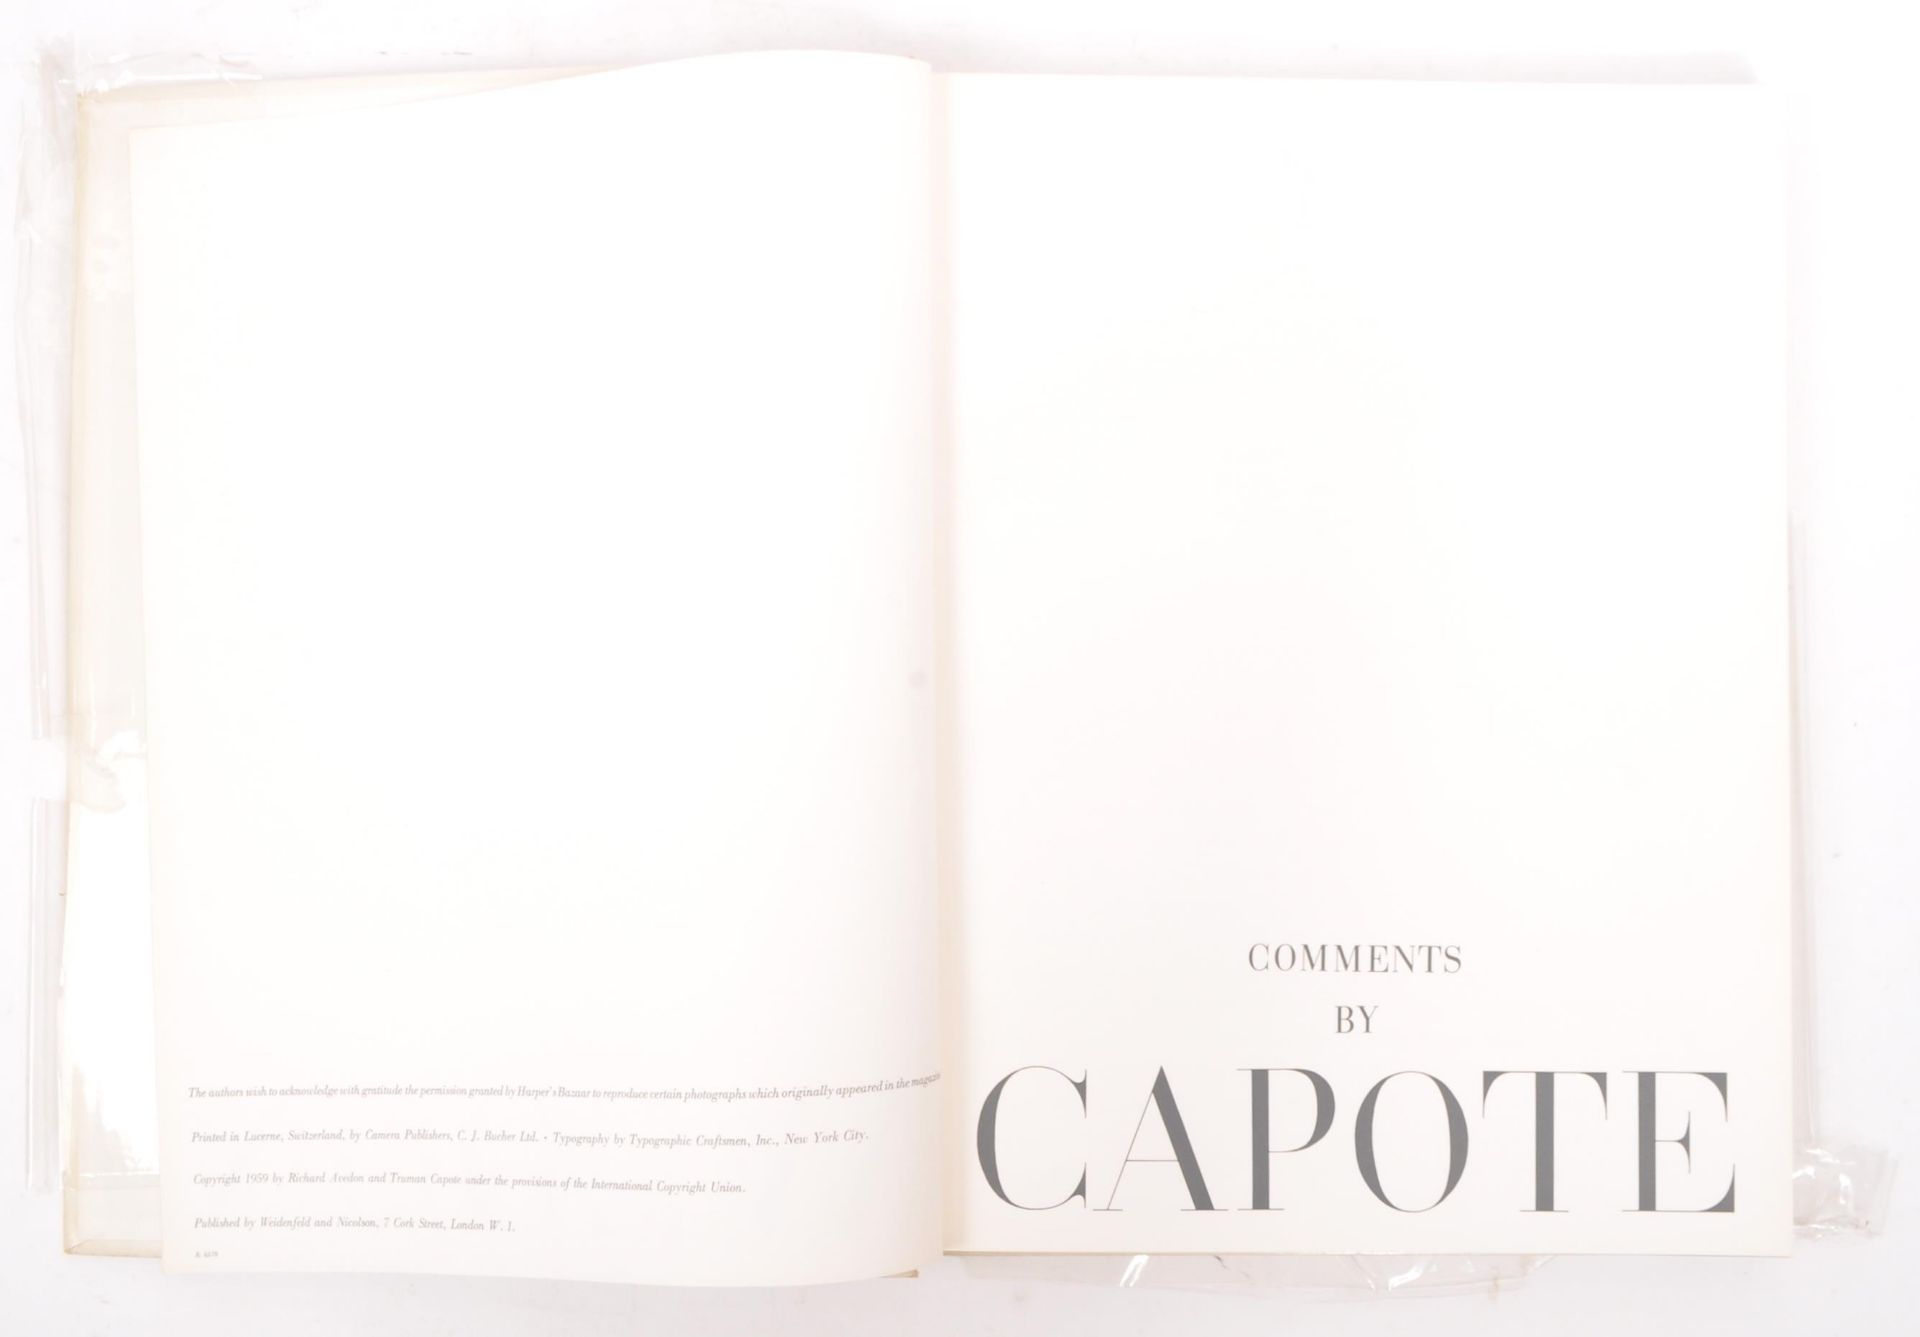 RICHARD AVEDON TRUMAN CAPOTE OBSERVATIONS PHOTOGRAPHY BOOK - Image 2 of 6